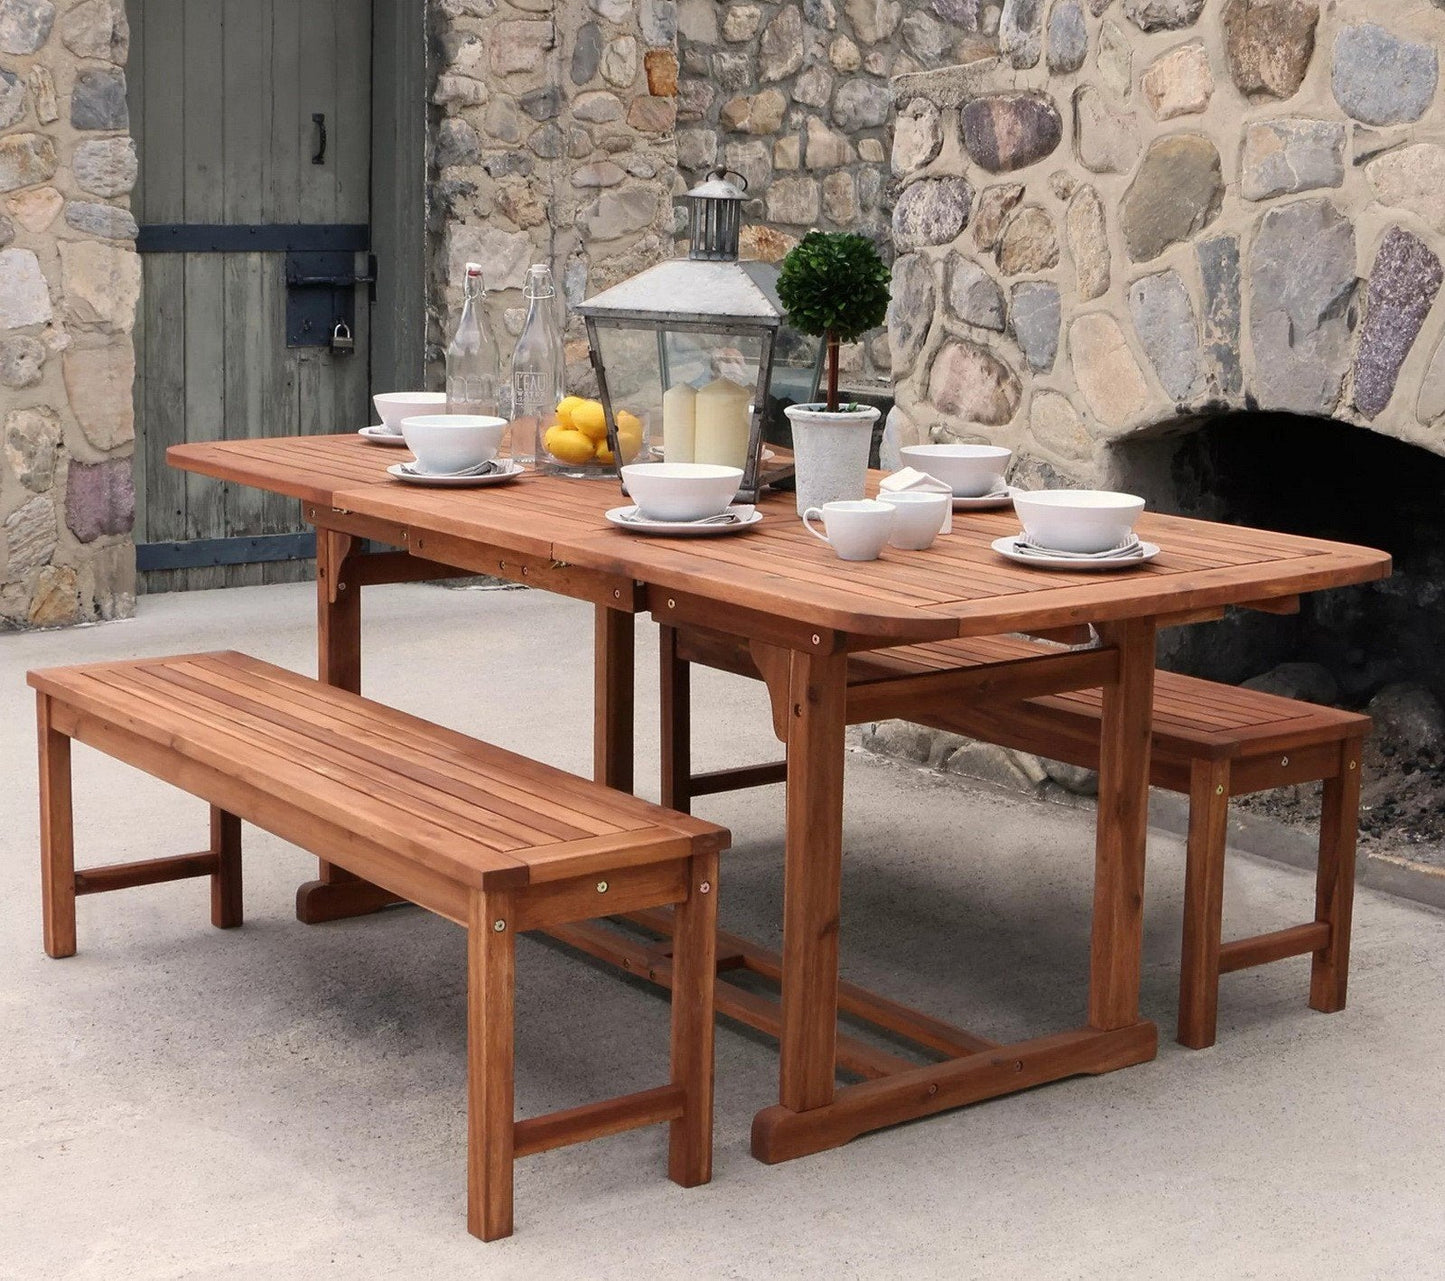 Acacia Hardwood Outdoor Expandable Wood Picnic Table Dining Set w/ 2 Benches